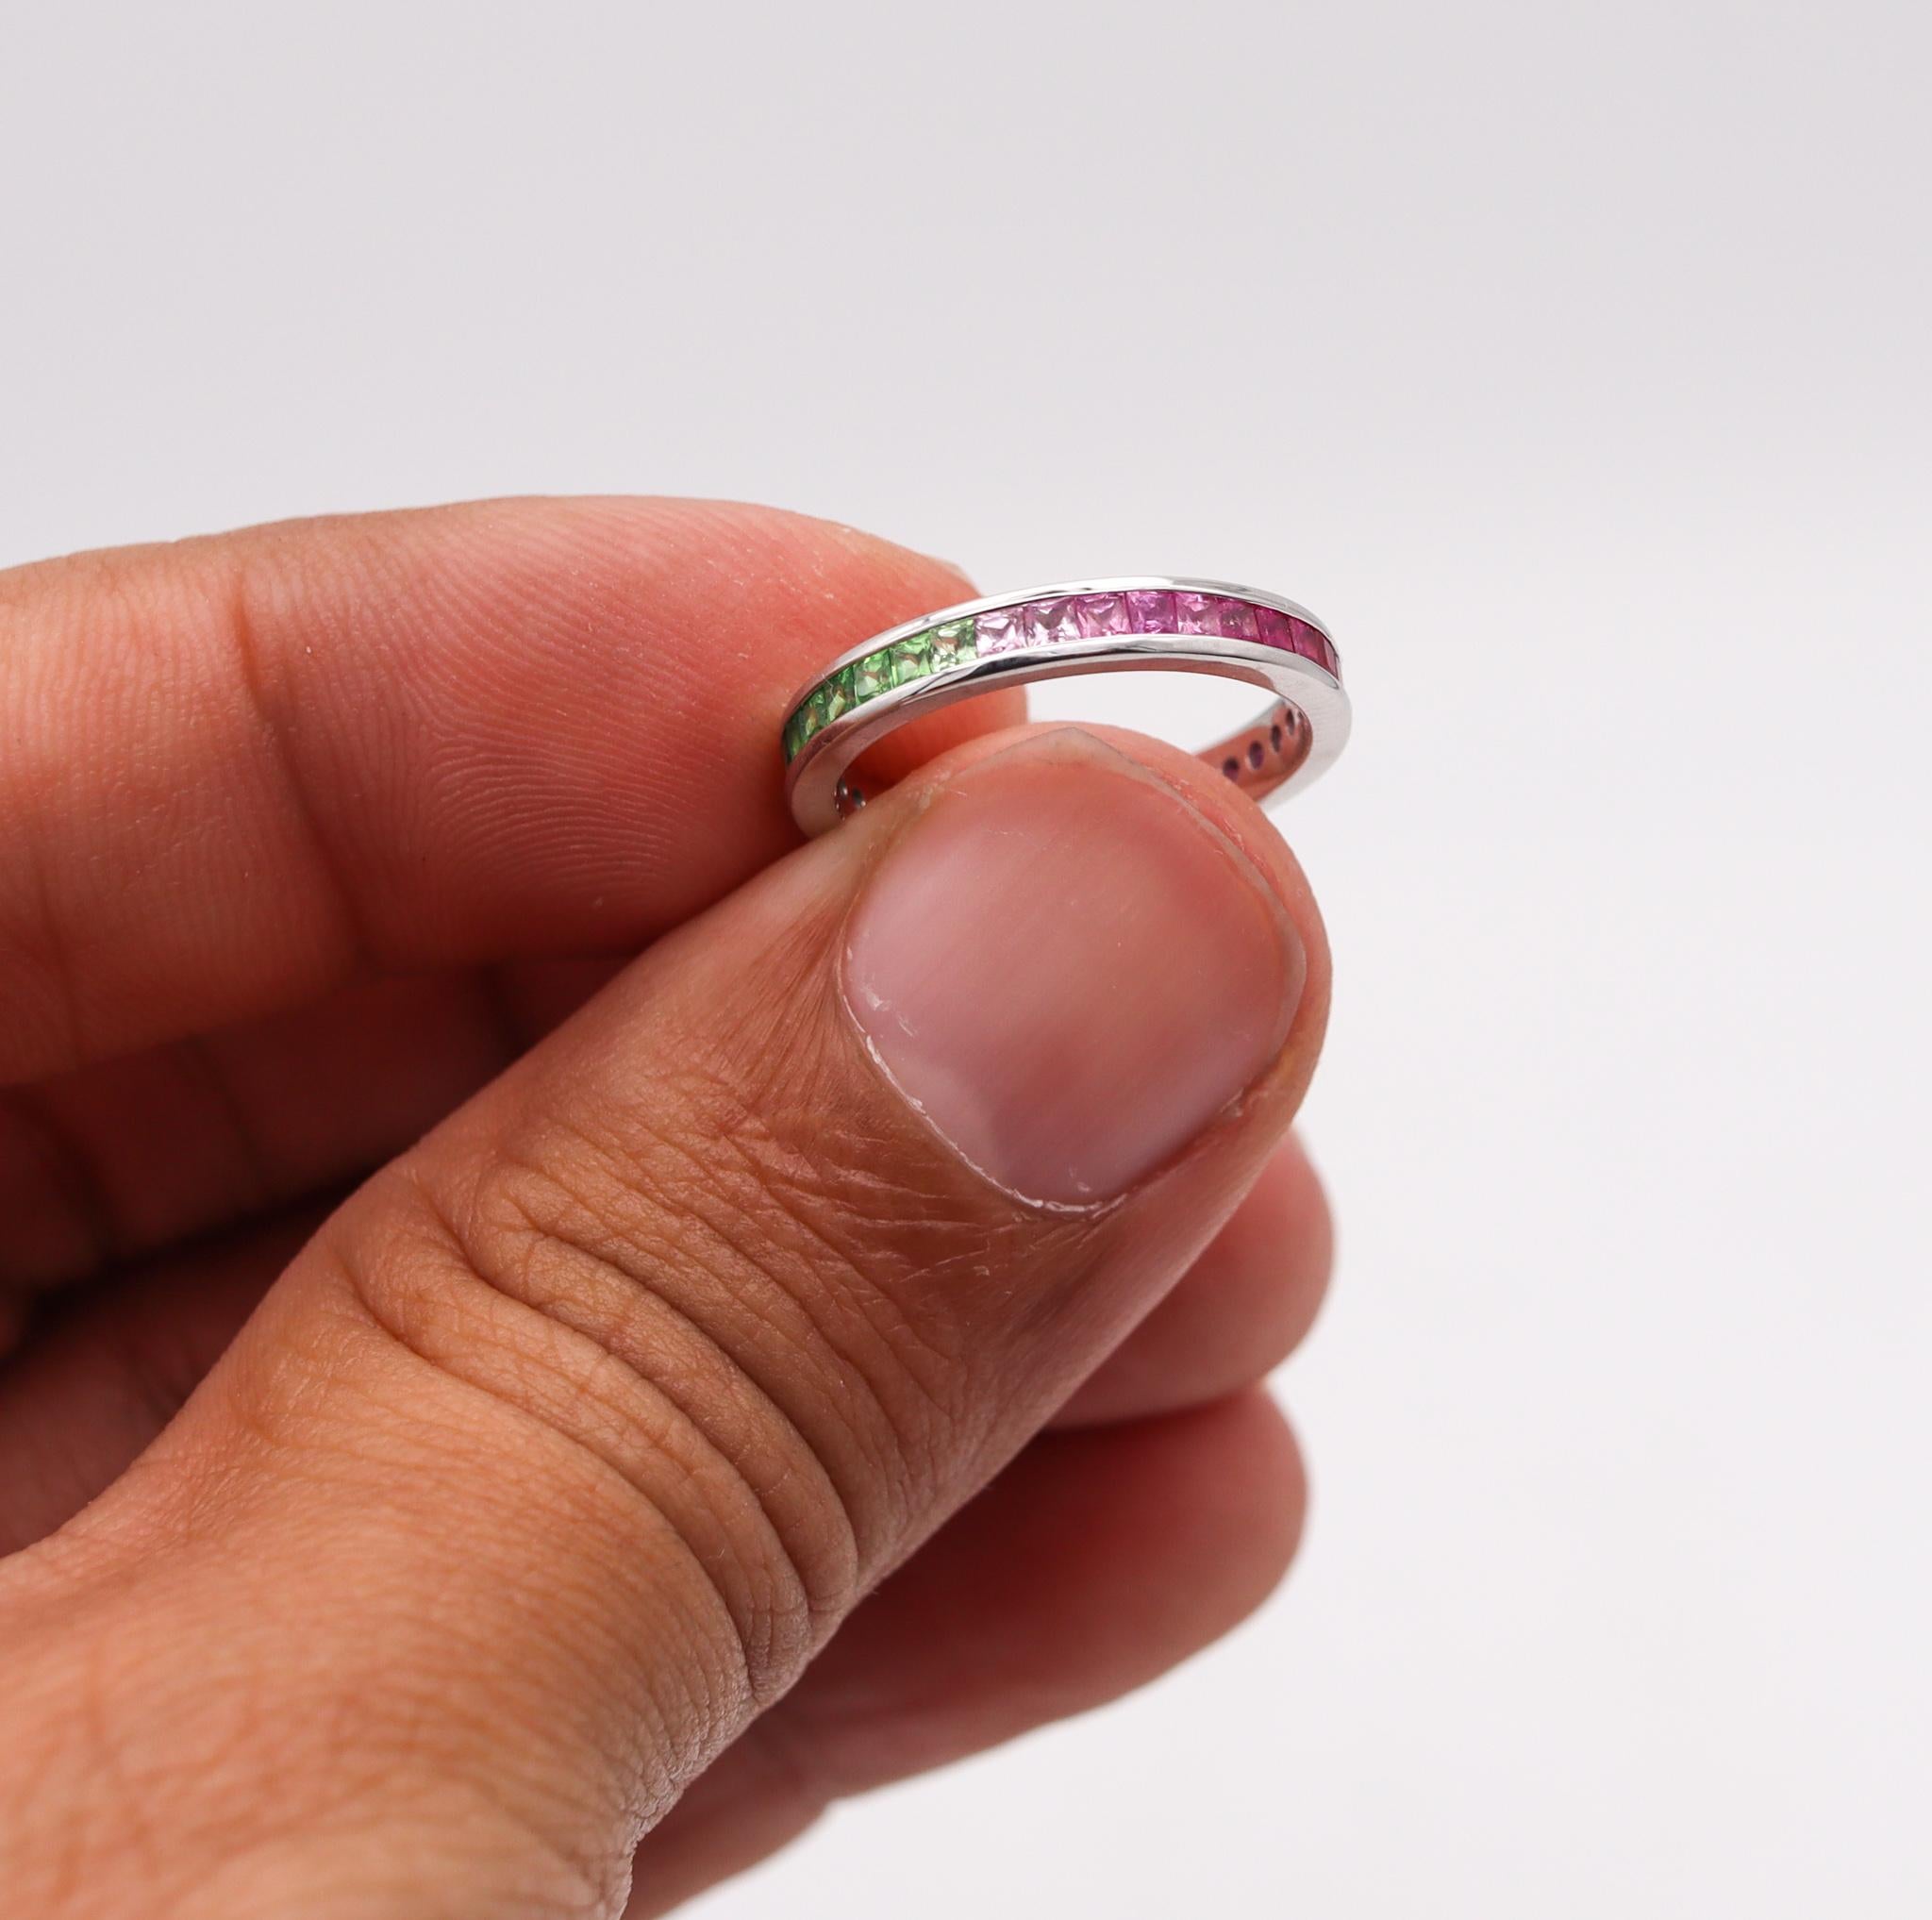 Eternity Ring Band in 18kt White Gold with 1.95 Ctw in Green and Pink Sapphires In Excellent Condition For Sale In Miami, FL